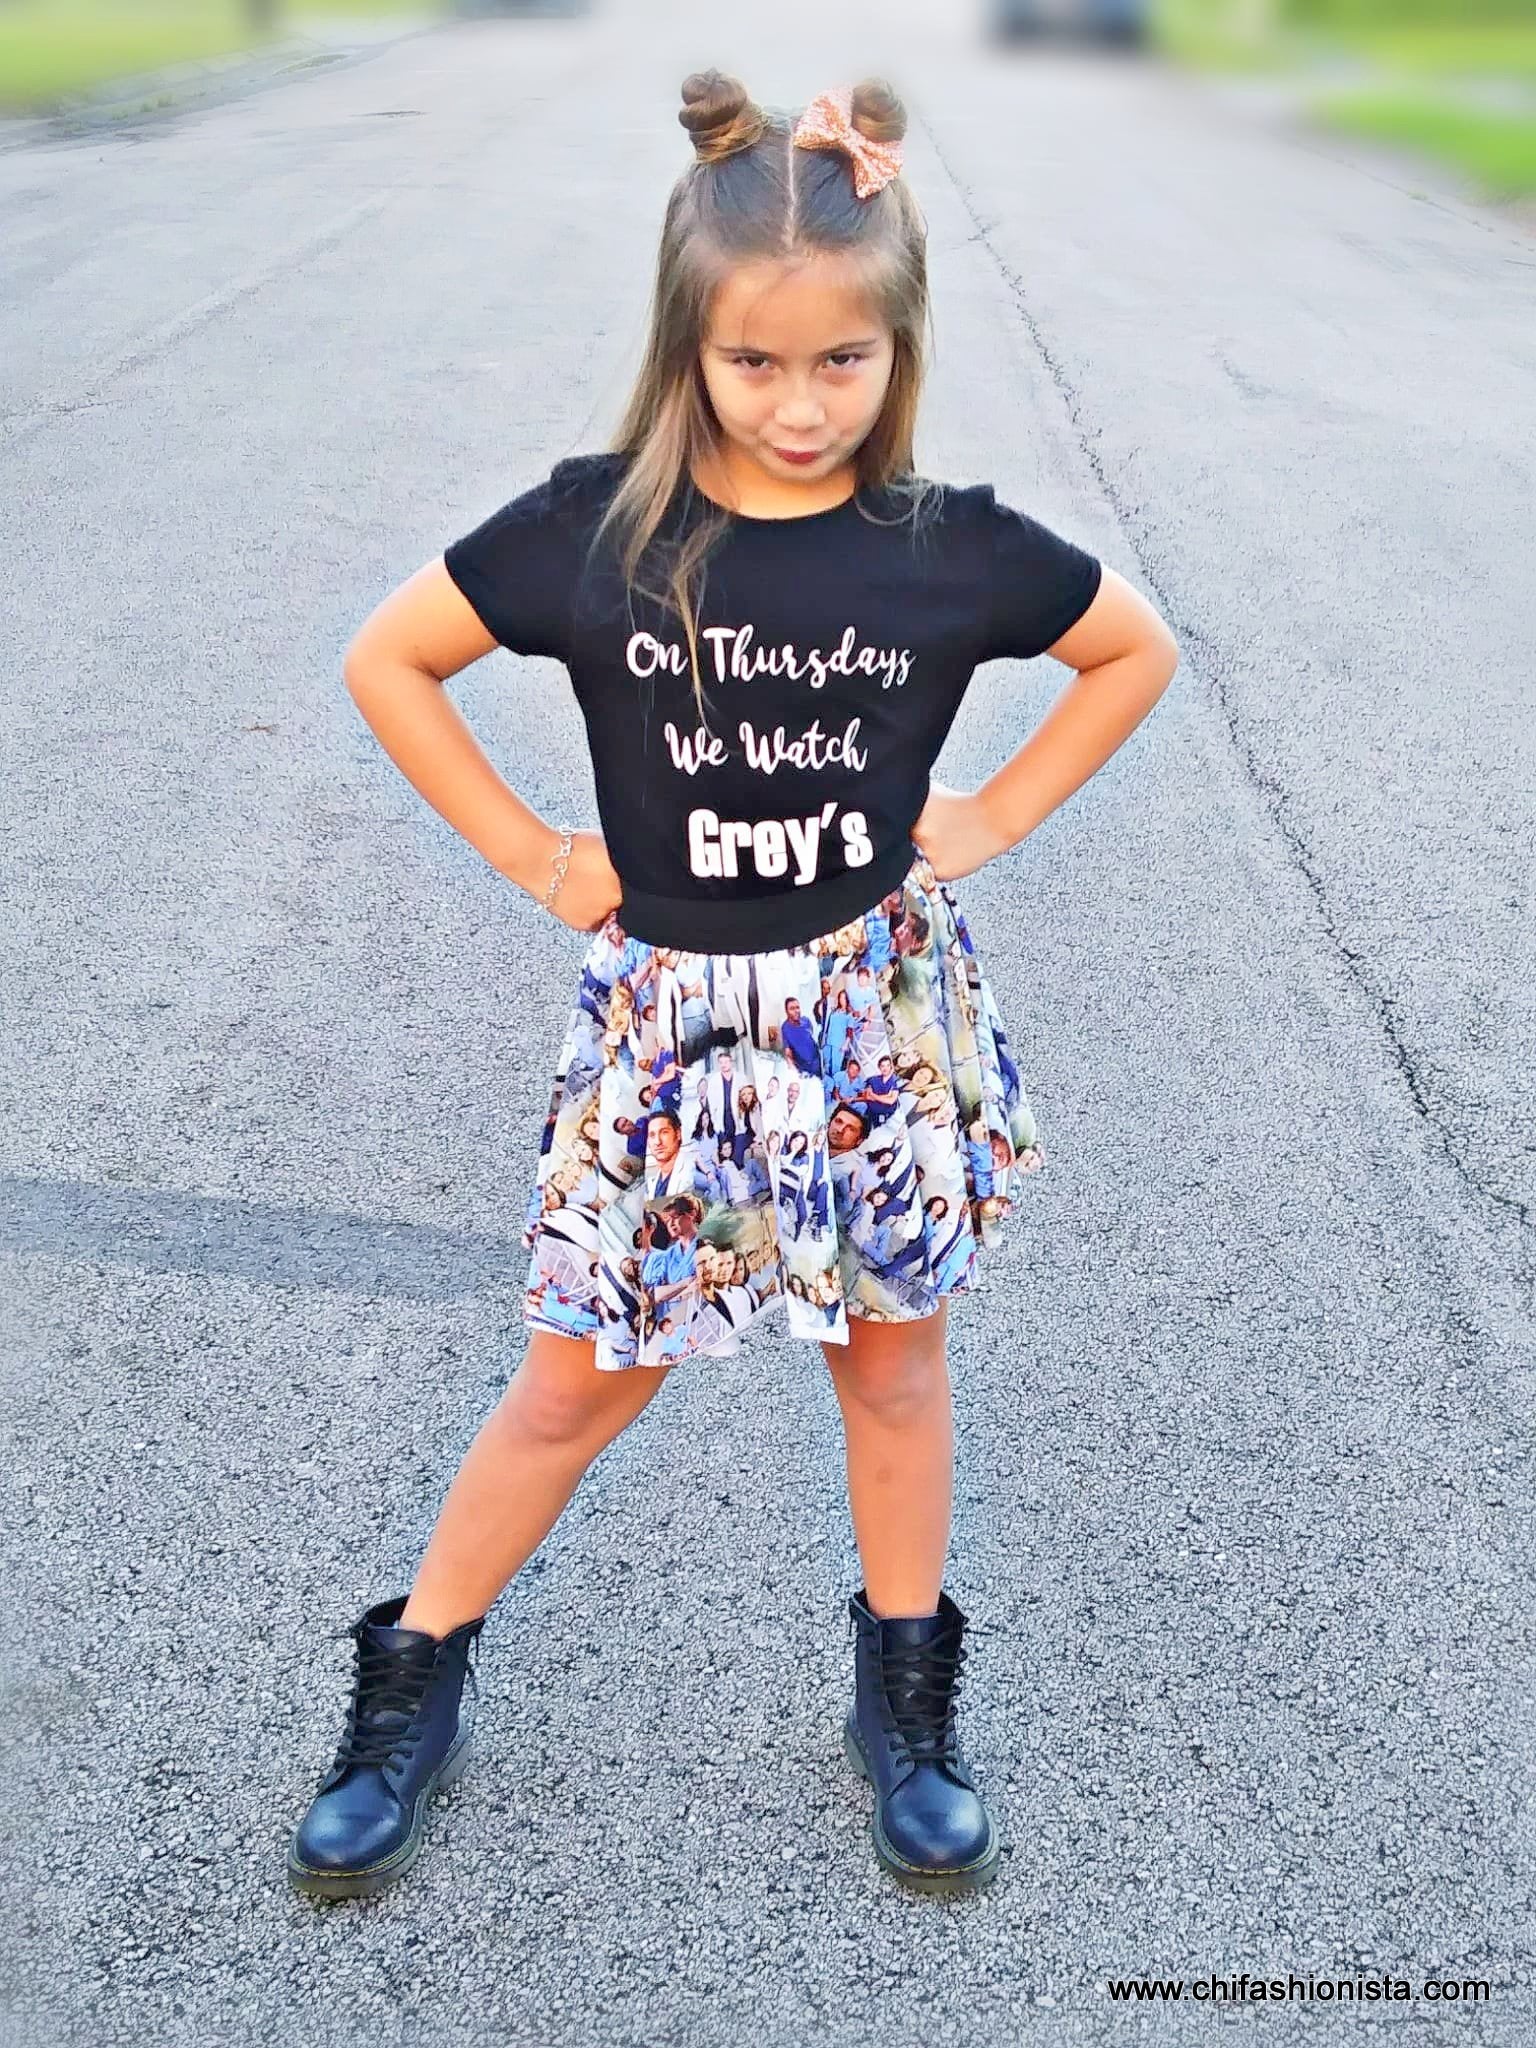 Handcrafted Children's Clothing, Clothing for Children and Parents, On Thursday's We Watch Grey's Shirt, chi-fashionista